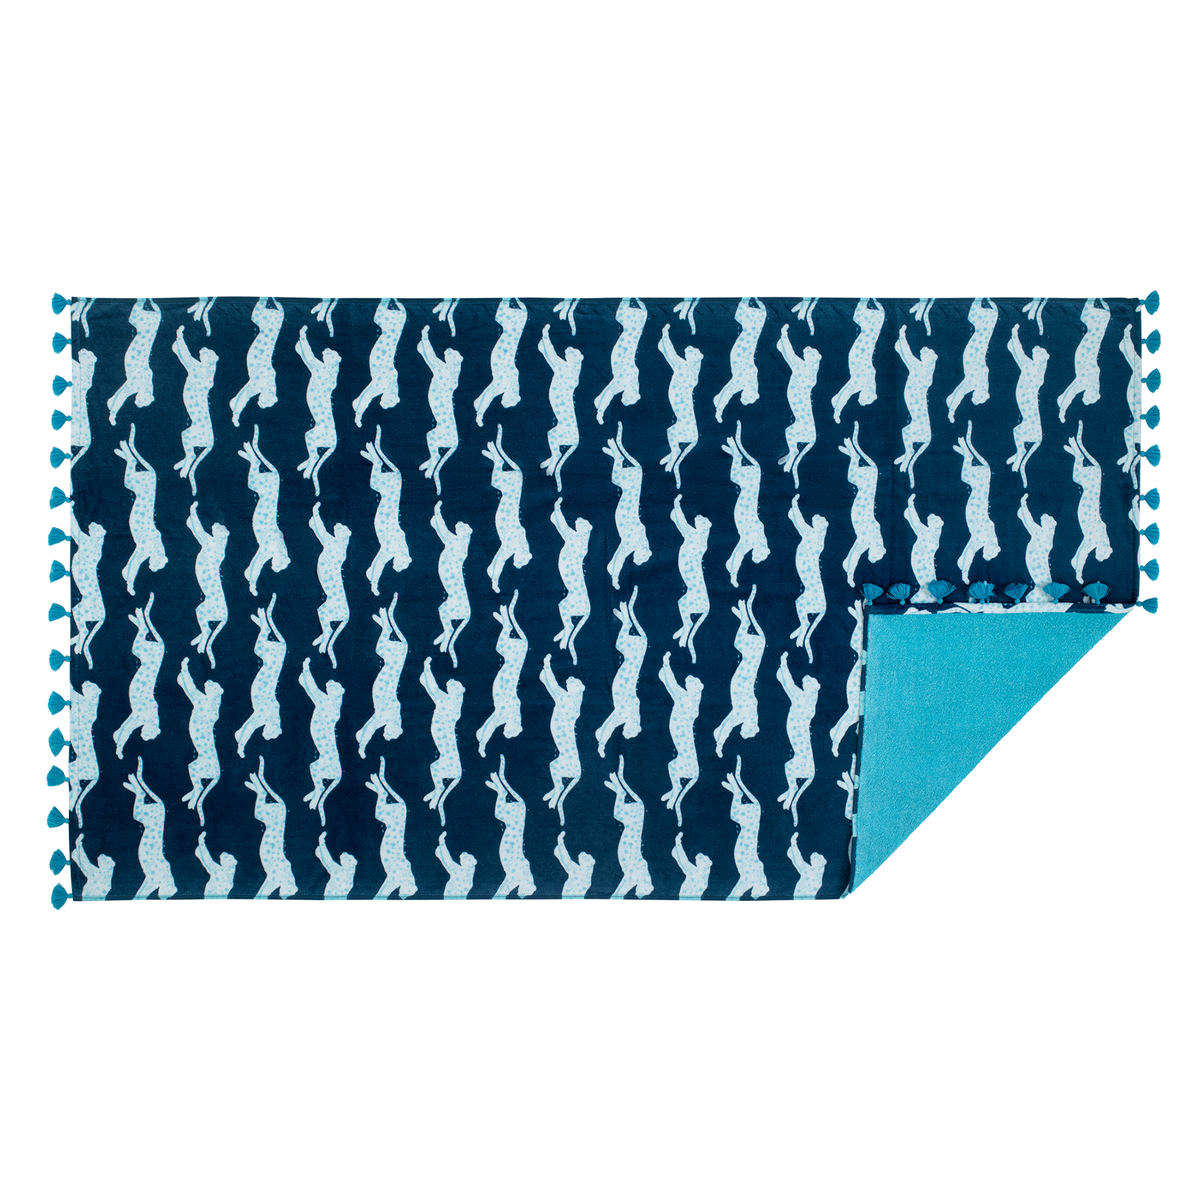 Flat Silo of Matouk Leaping Leopard Beach Towels in Color Navy